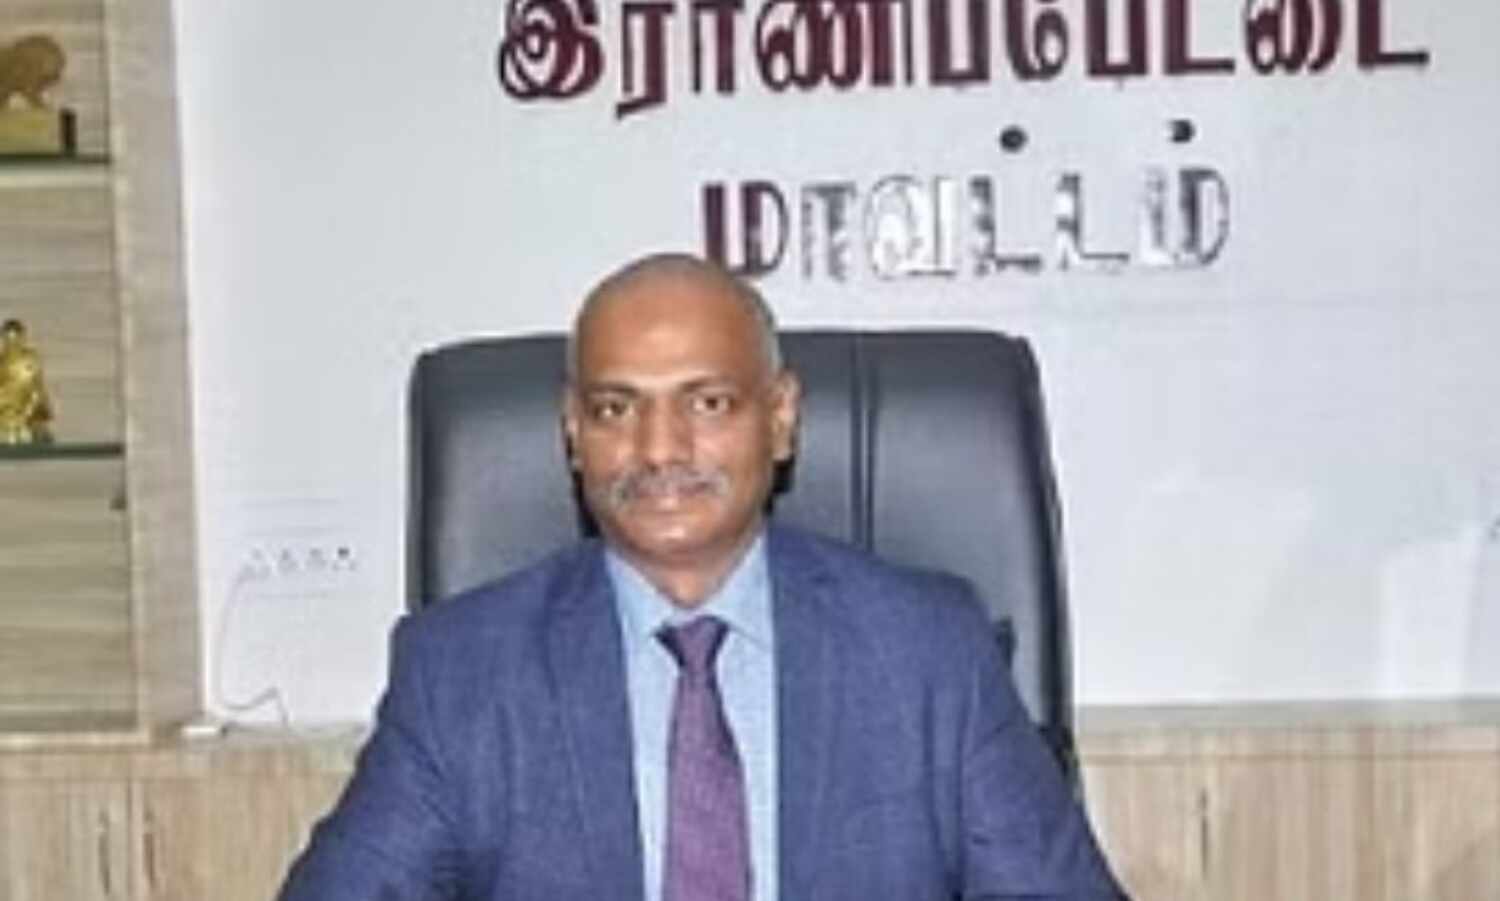 Tirupattur collector locks door for late comers to coordination council meeting